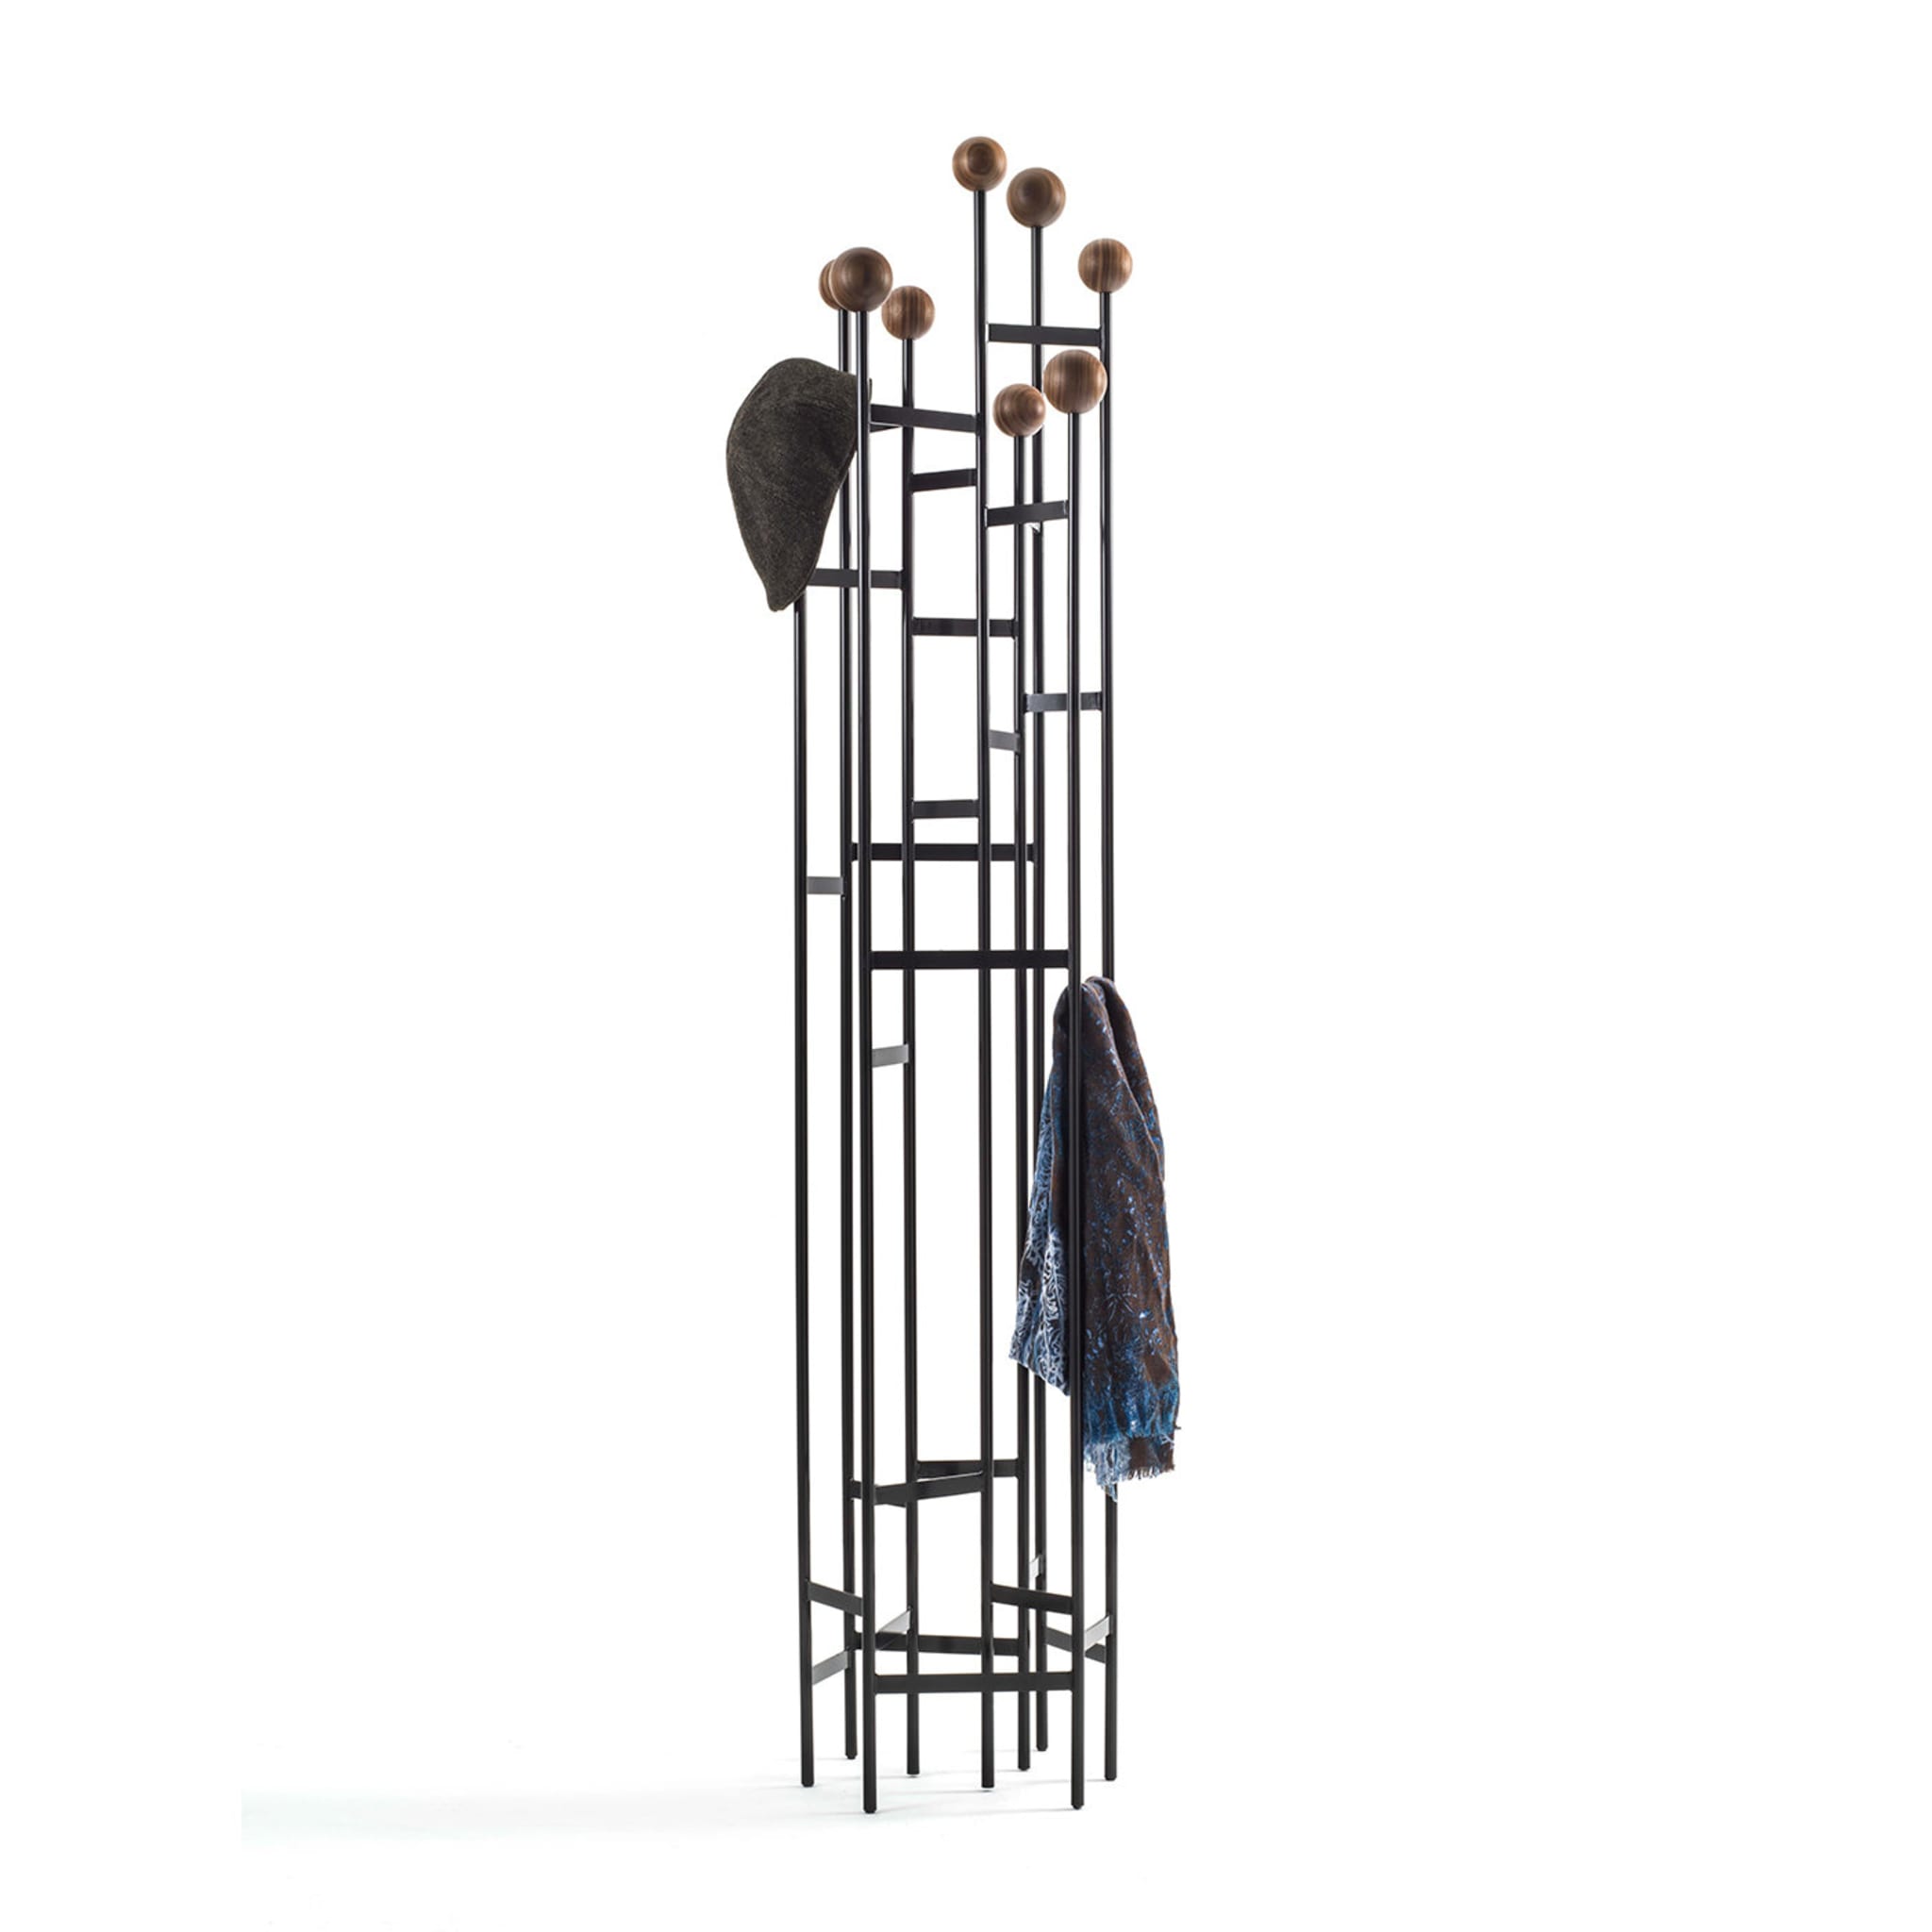 Planets coat stand - Alternative view 1